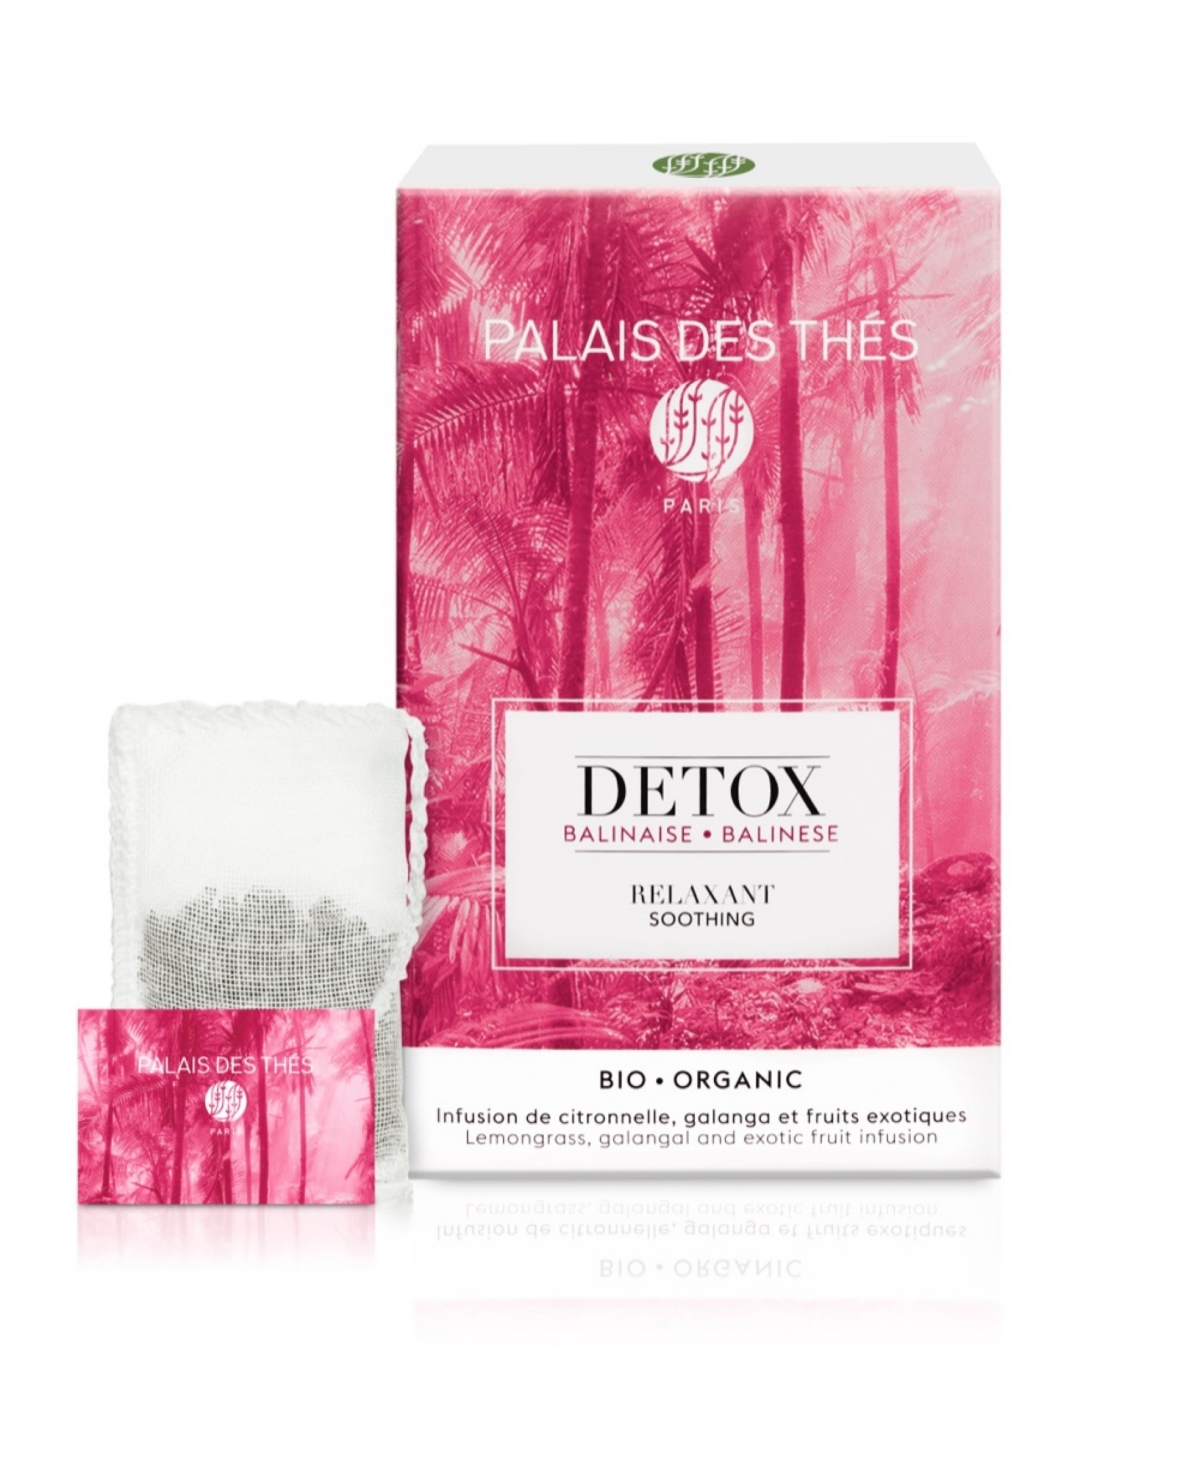 Palais Des Thes Balinese Detox Soothing Box, Pack Of 20 Tea Bags In No Color